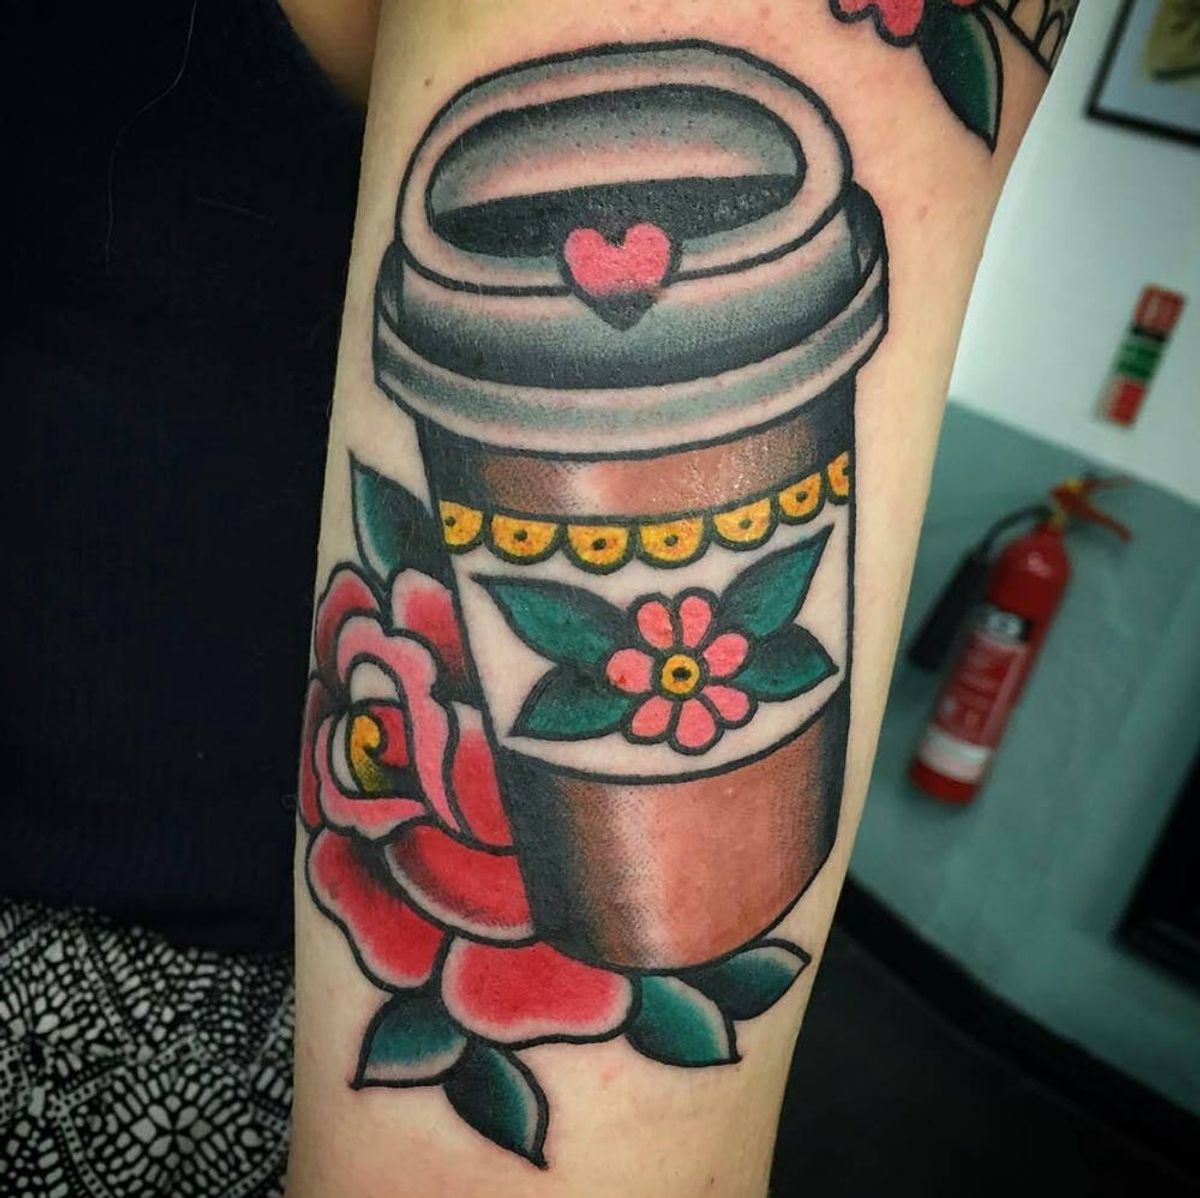 10 Coffee-Inspired Tattoos That Are the Ultimate Ode to Caffeine